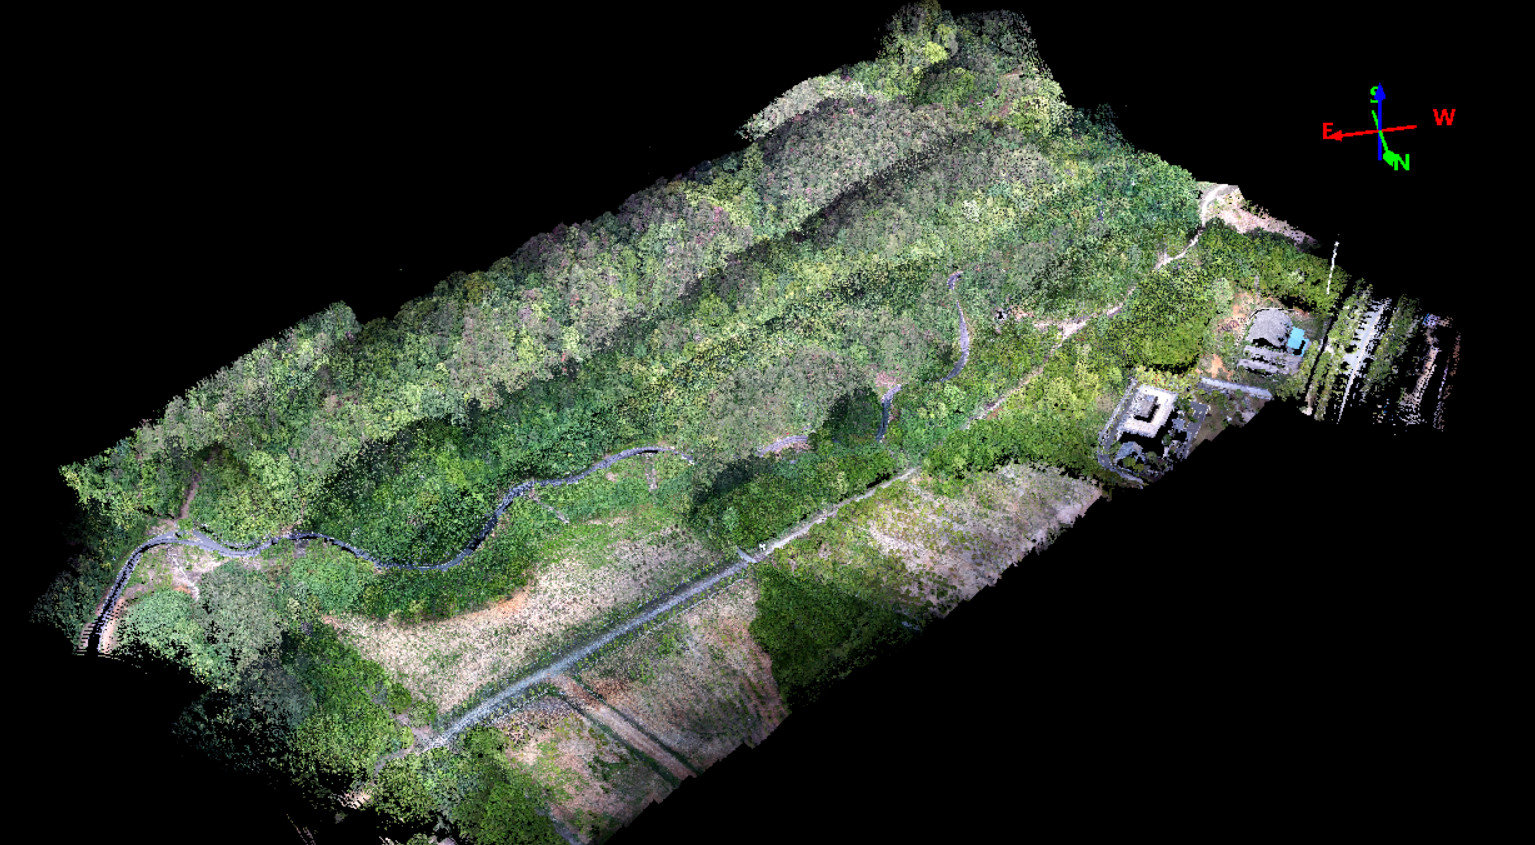 Latest company case about UAV LiDAR Scanning System Geosun GS-260X Application for Forestry